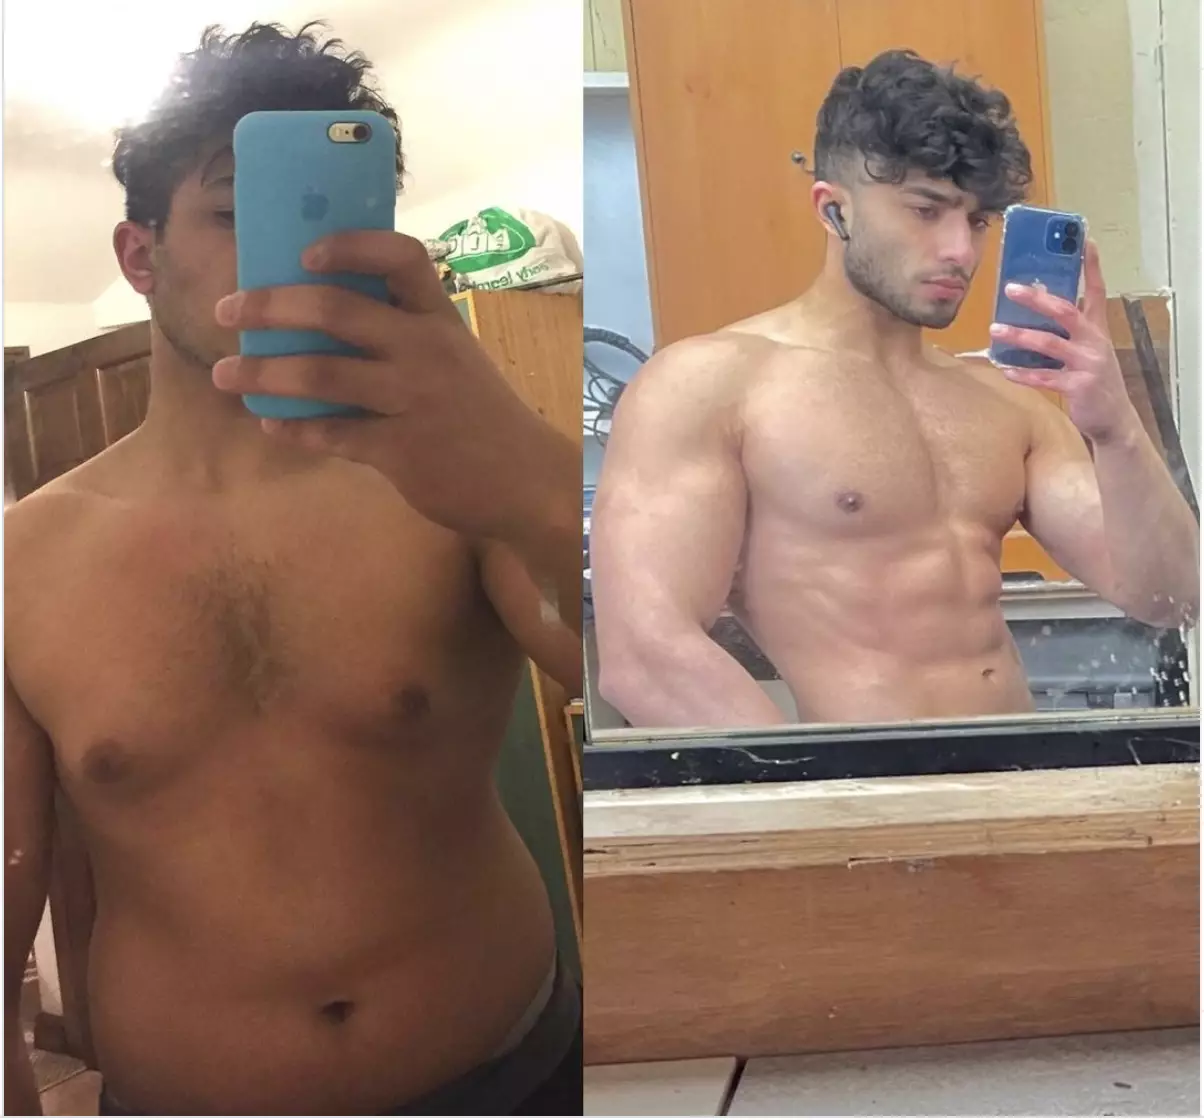 Zack Chugg is a fitness ambassador after doing so well with his own weightloss journey (